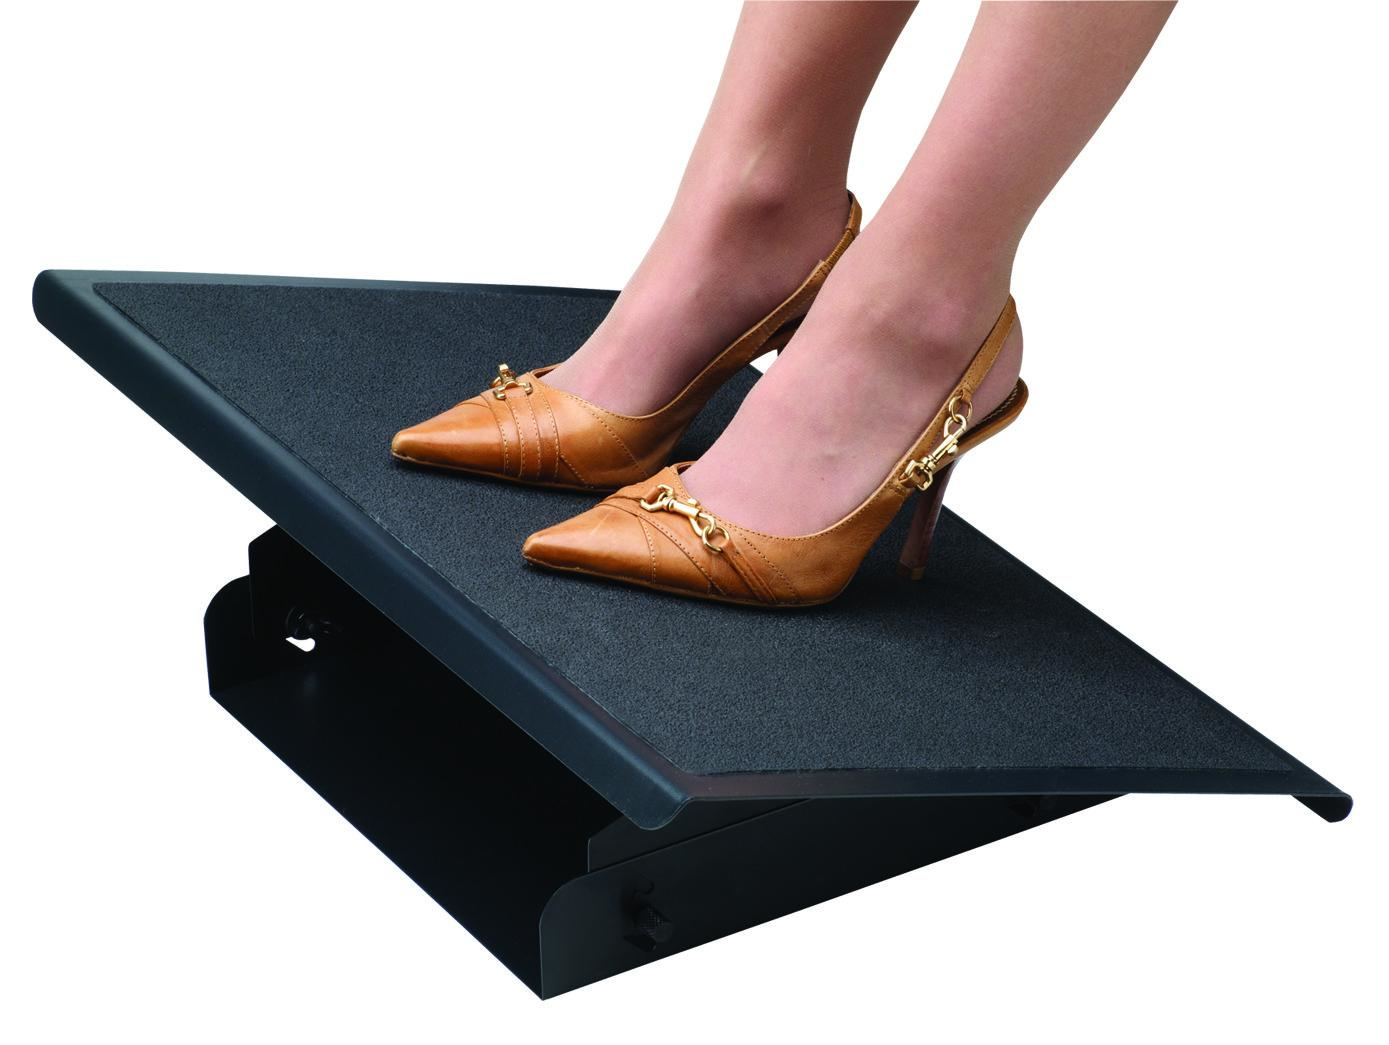 Fellowes Professional Series Heavy Duty Foot Support